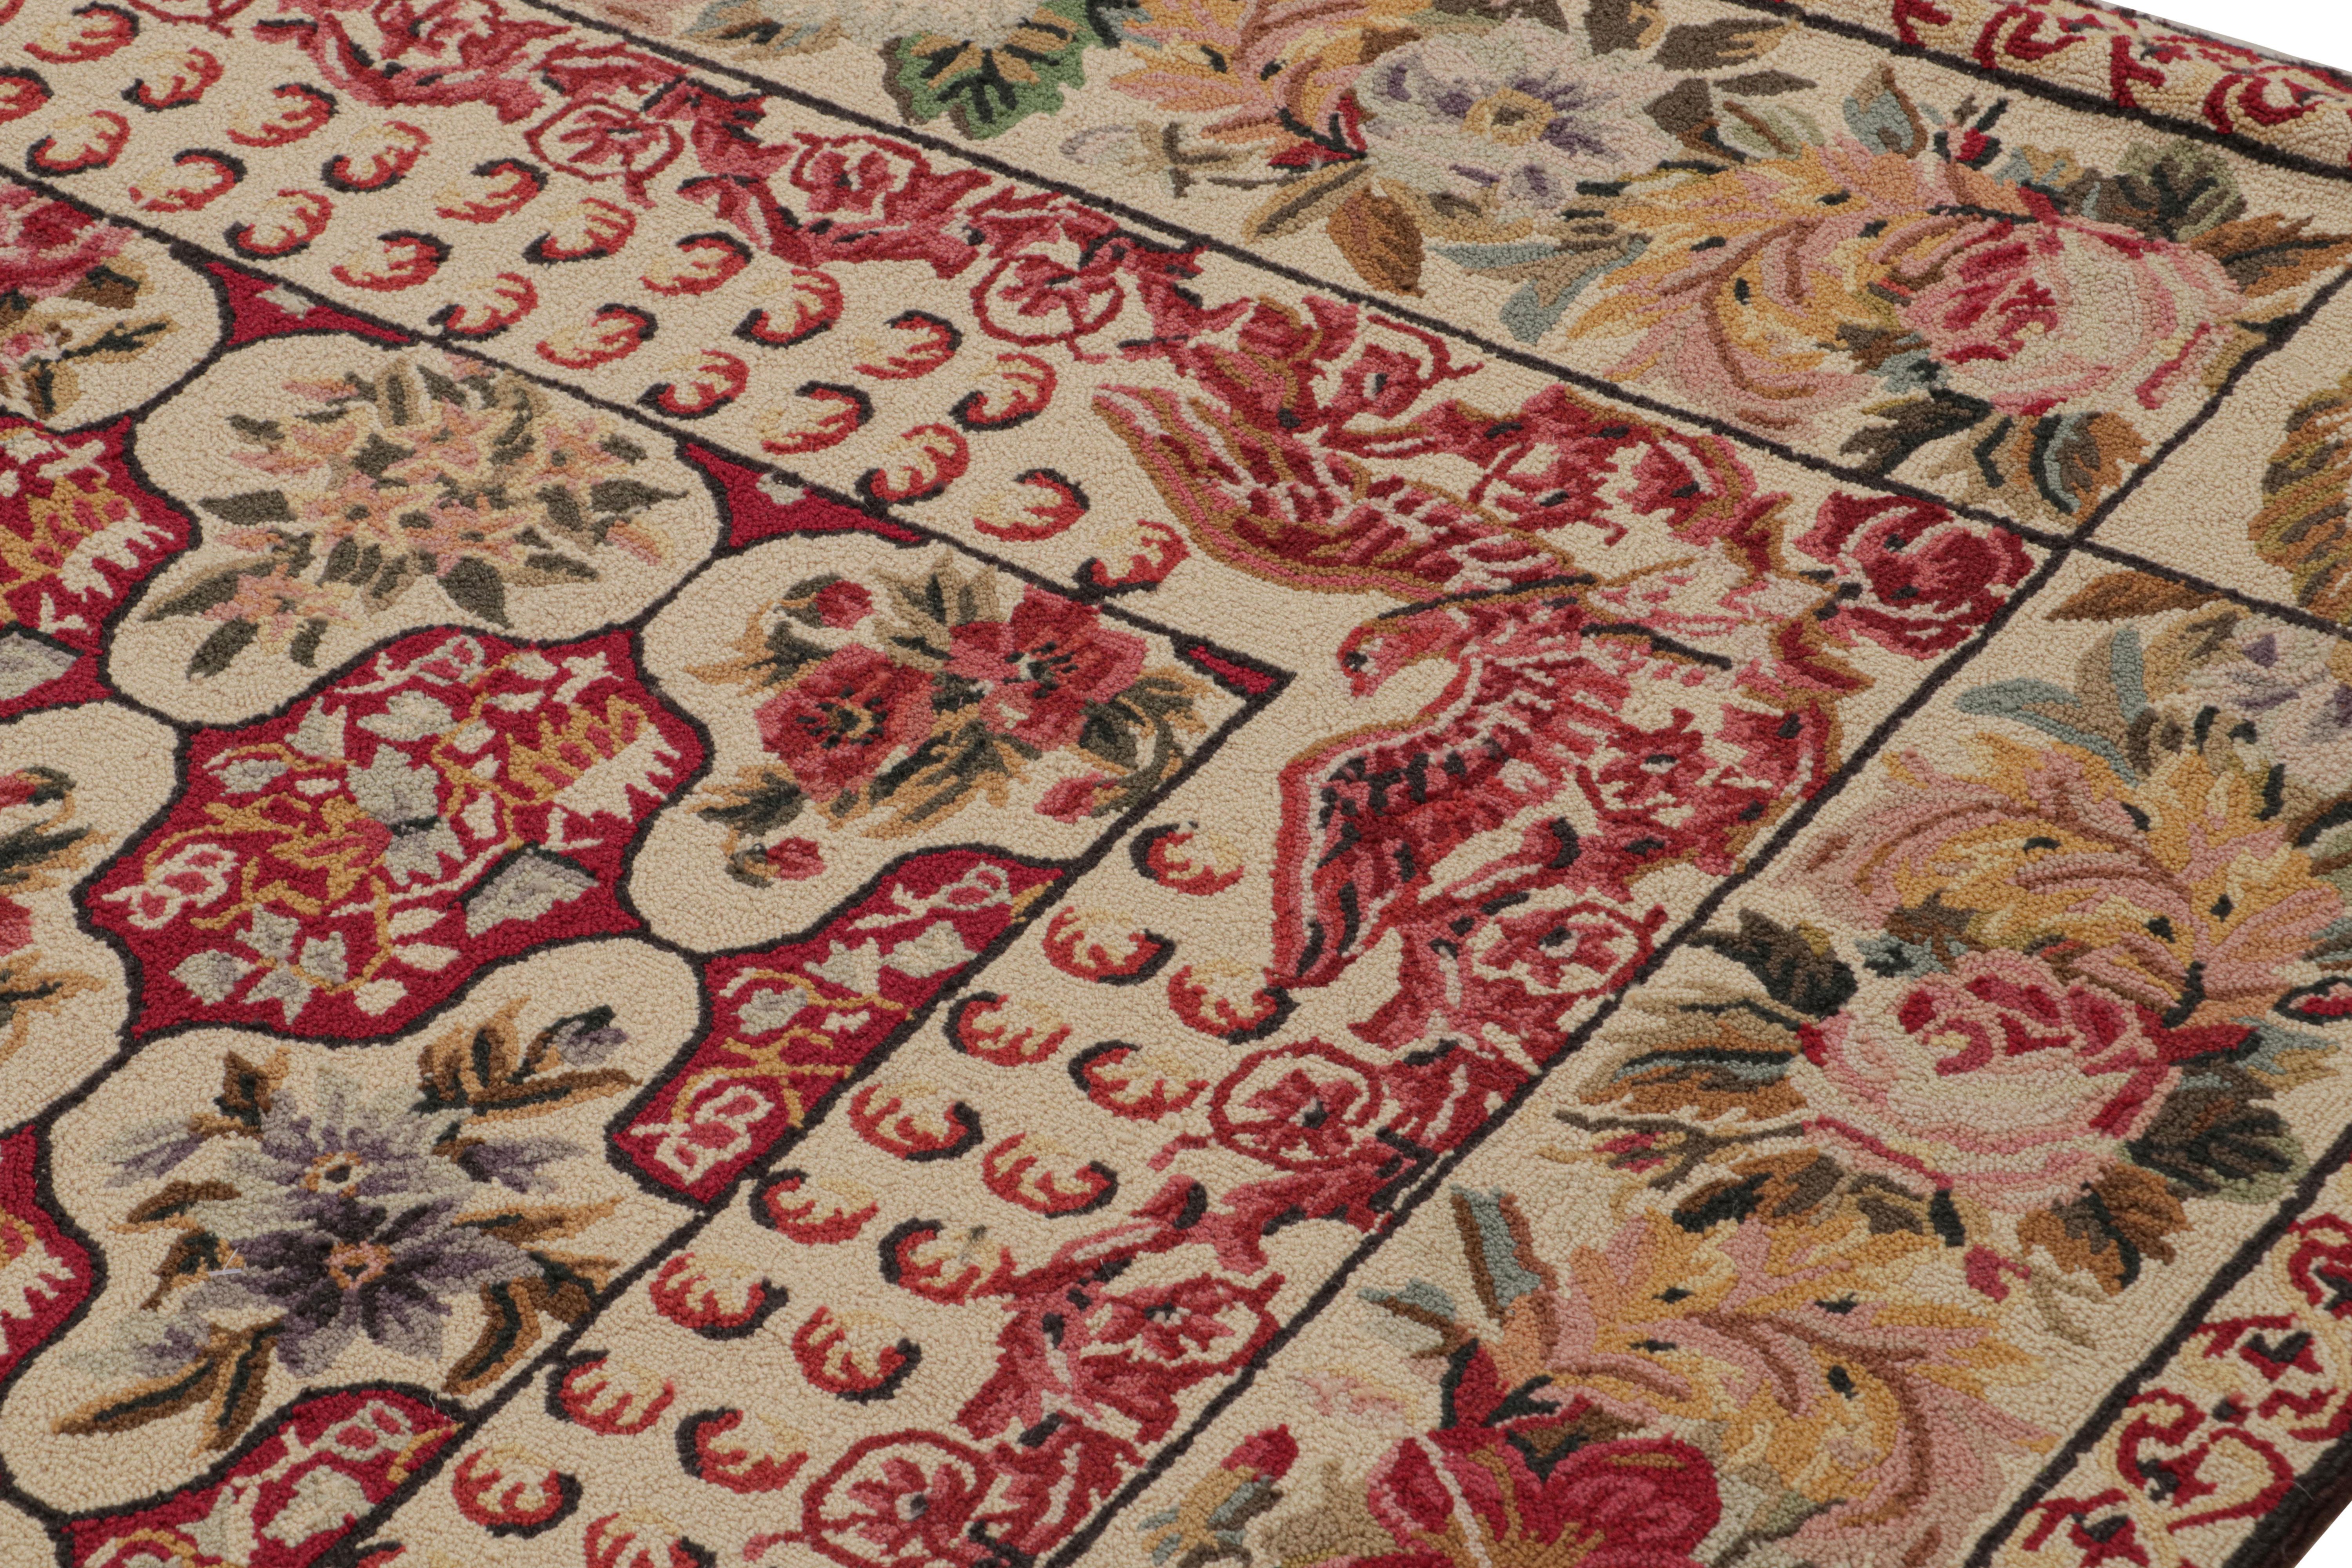 Rare Antique Hooked Rug with Red & Beige Floral Patterns, from Rug & Kilim In Good Condition For Sale In Long Island City, NY